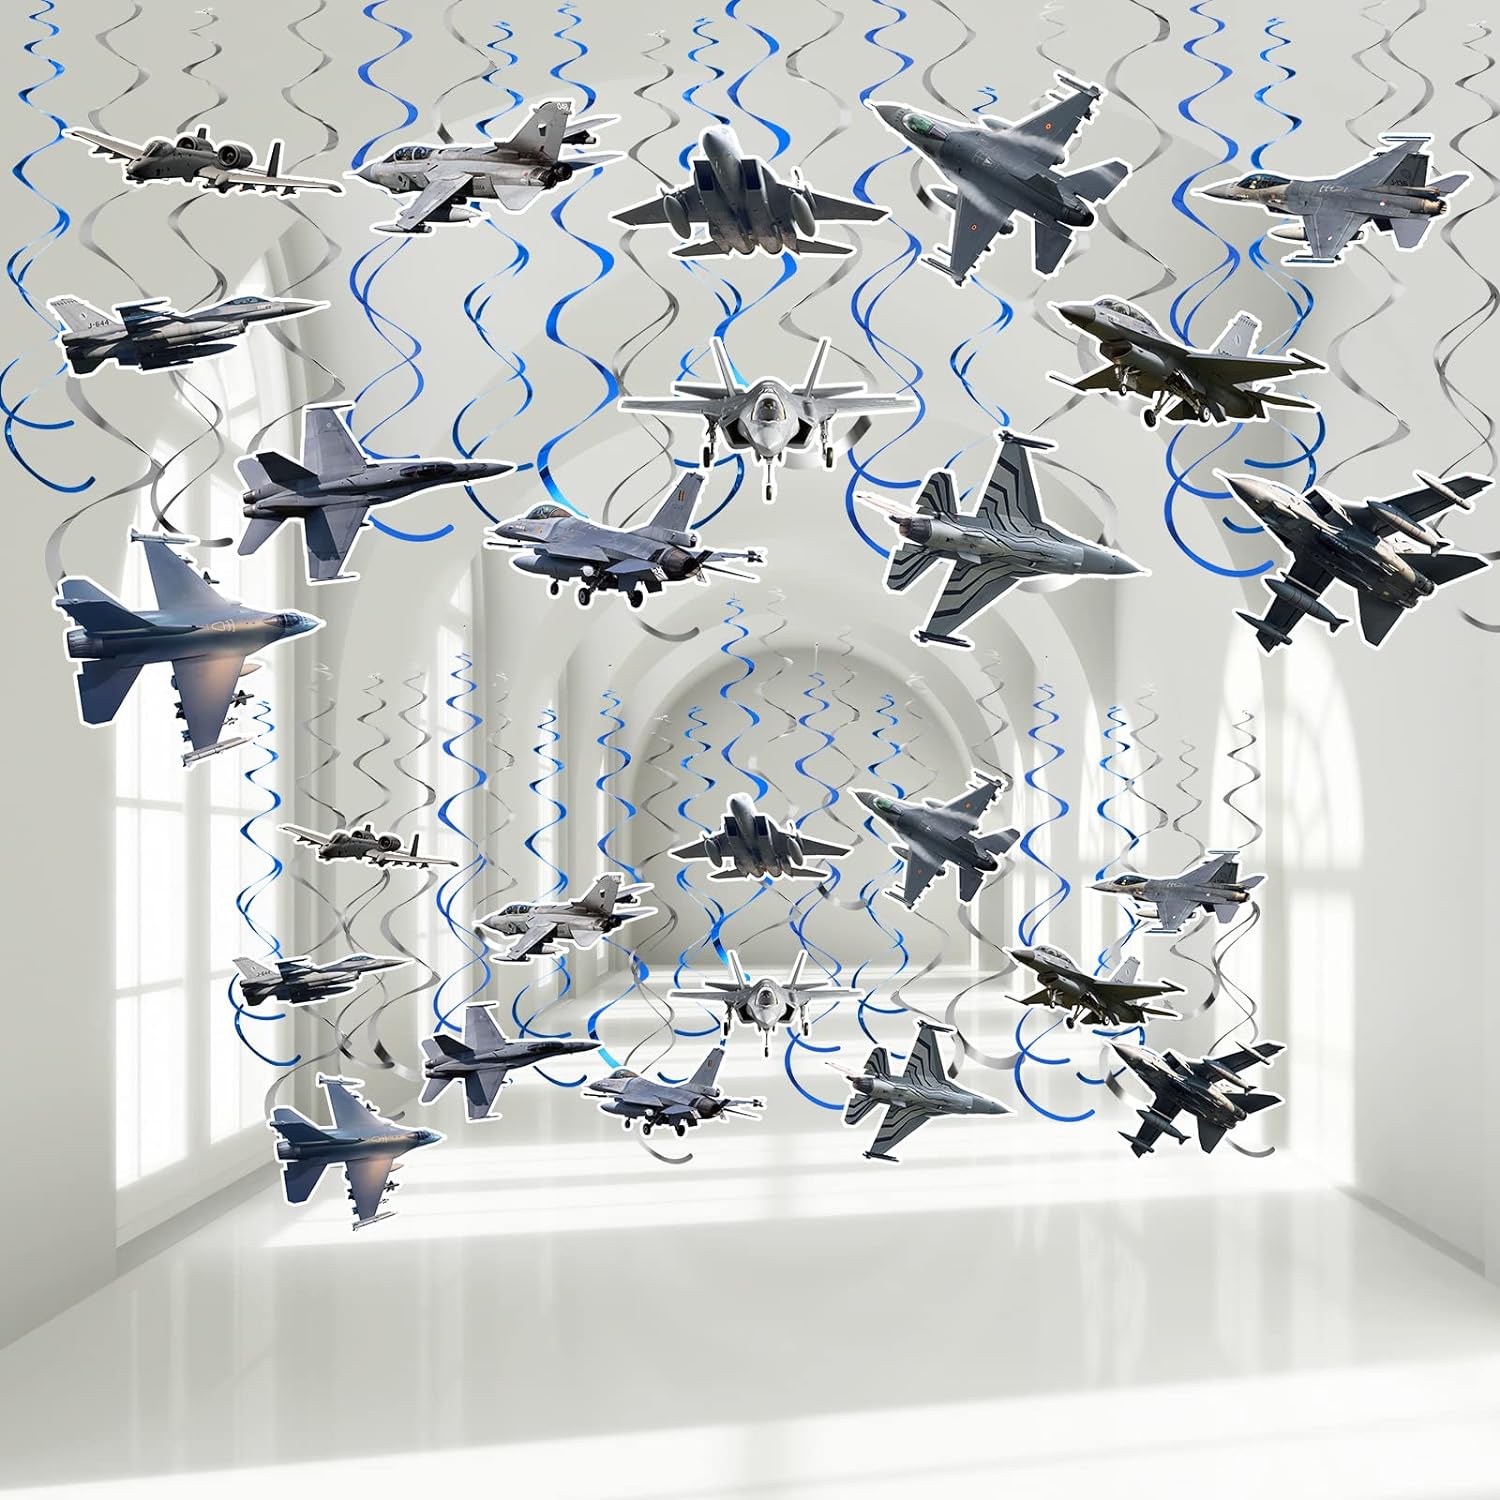 thinkstar 26 Pieces Airplane Hanging Swirl Decoration Hanging Swirls Supplies Cool Plane Hanging Swirl Streamers Aircraft Ceiling Str?